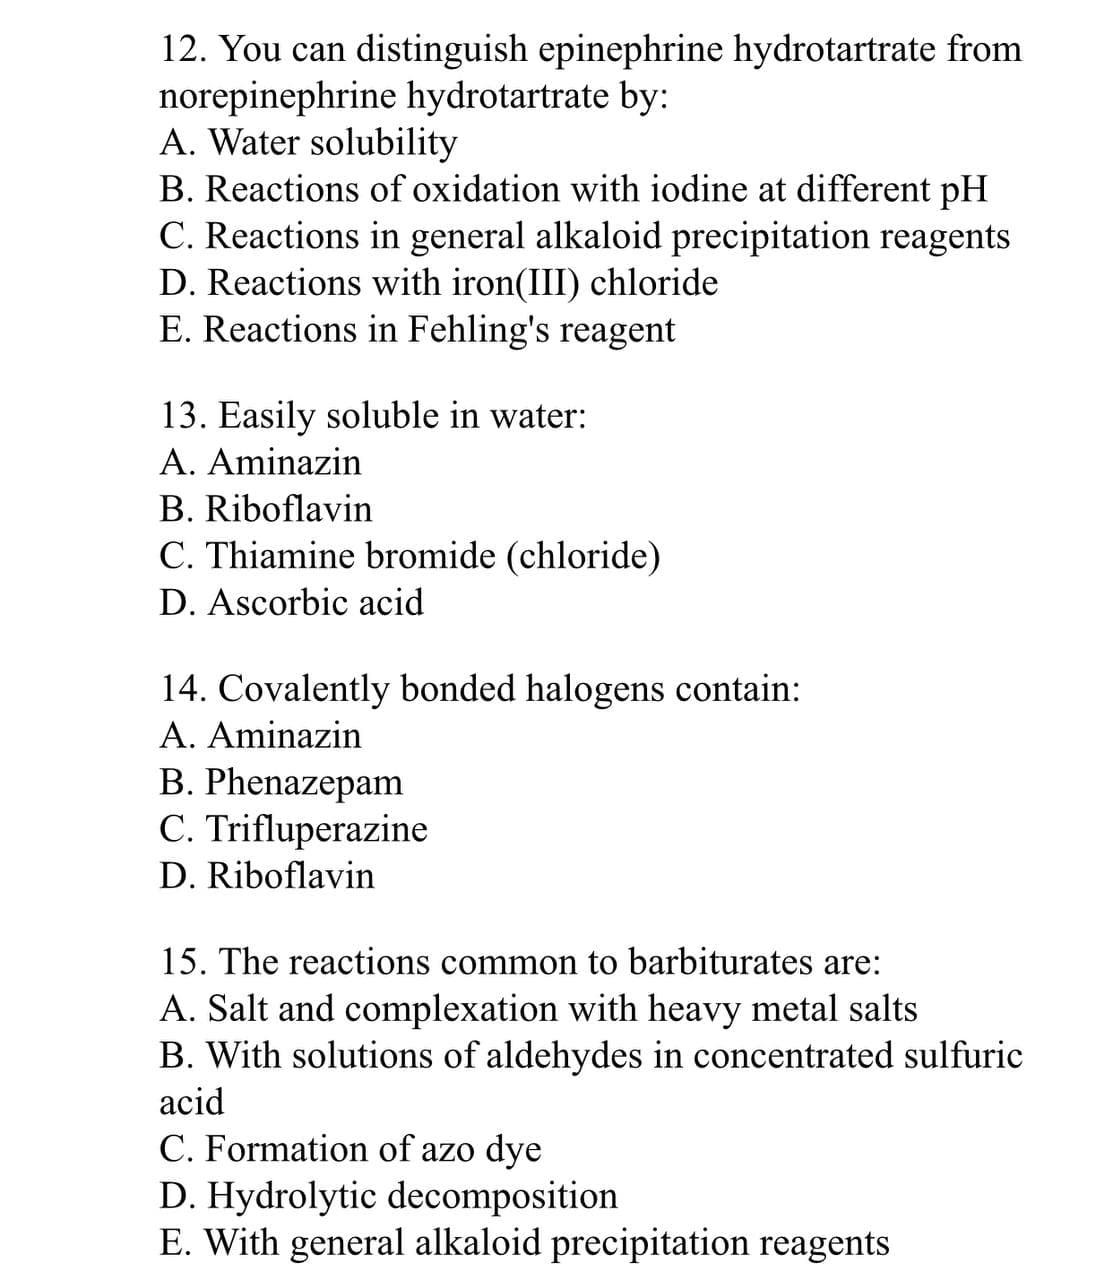 12. You can distinguish epinephrine hydrotartrate from
norepinephrine hydrotartrate by:
A. Water solubility
B. Reactions of oxidation with iodine at different pH
C. Reactions in general alkaloid precipitation reagents
D. Reactions with iron(III) chloride
E. Reactions in Fehling's reagent
13. Easily soluble in water:
A. Aminazin
B. Riboflavin
C. Thiamine bromide (chloride)
D. Ascorbic acid
14. Covalently bonded halogens contain:
A. Aminazin
B. Phenazepam
C. Trifluperazine
D. Riboflavin
15. The reactions common to barbiturates are:
A. Salt and complexation with heavy metal salts
B. With solutions of aldehydes in concentrated sulfuric
acid
C. Formation of azo dye
D. Hydrolytic decomposition
E. With general alkaloid precipitation reagents
